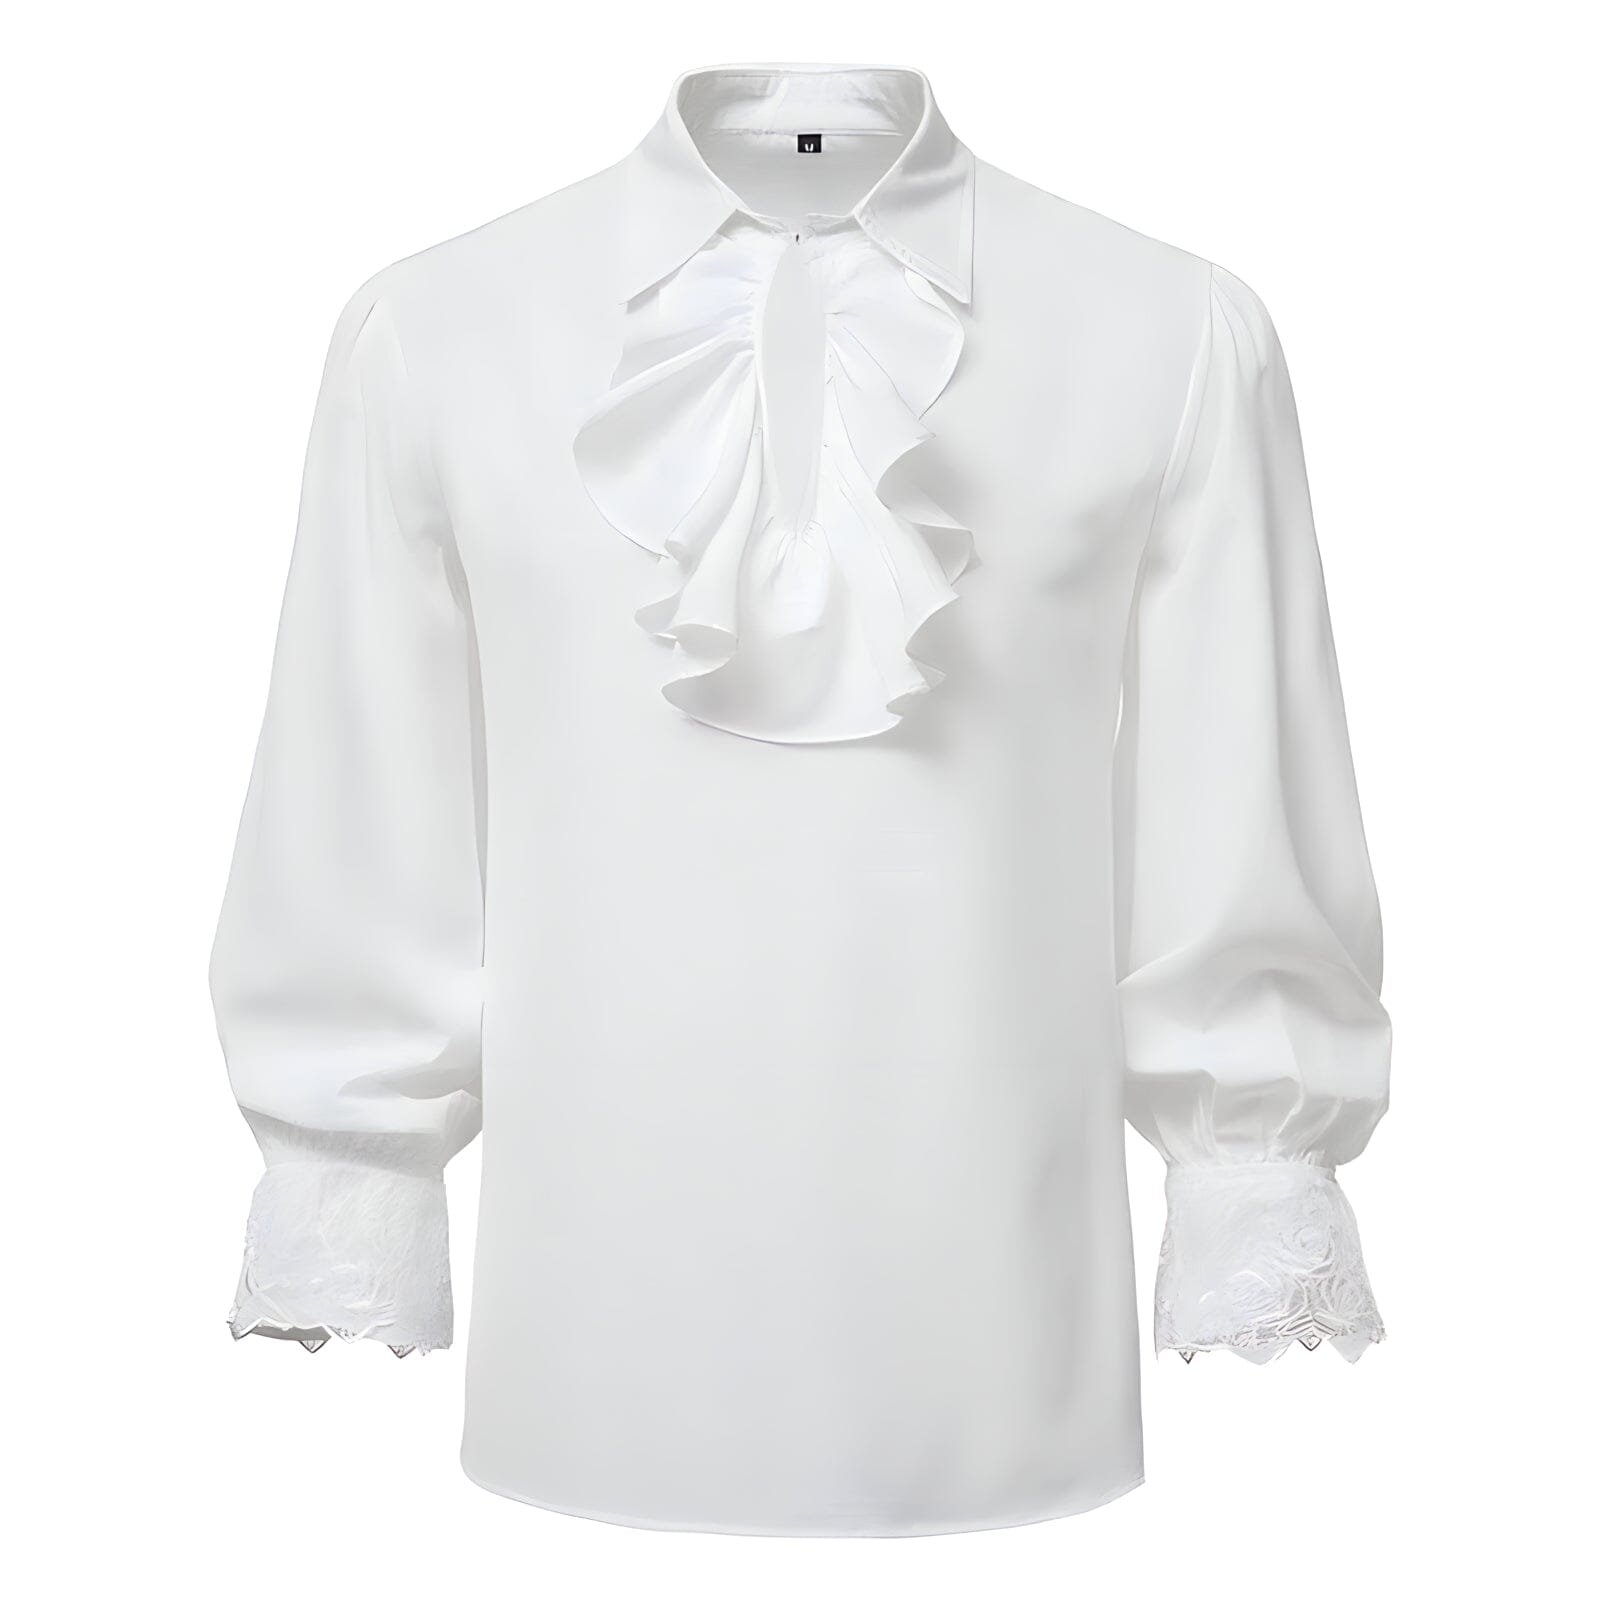 The Victorian Ruffled Long Sleeve Shirt - Multiple Colors WD Styles White S 